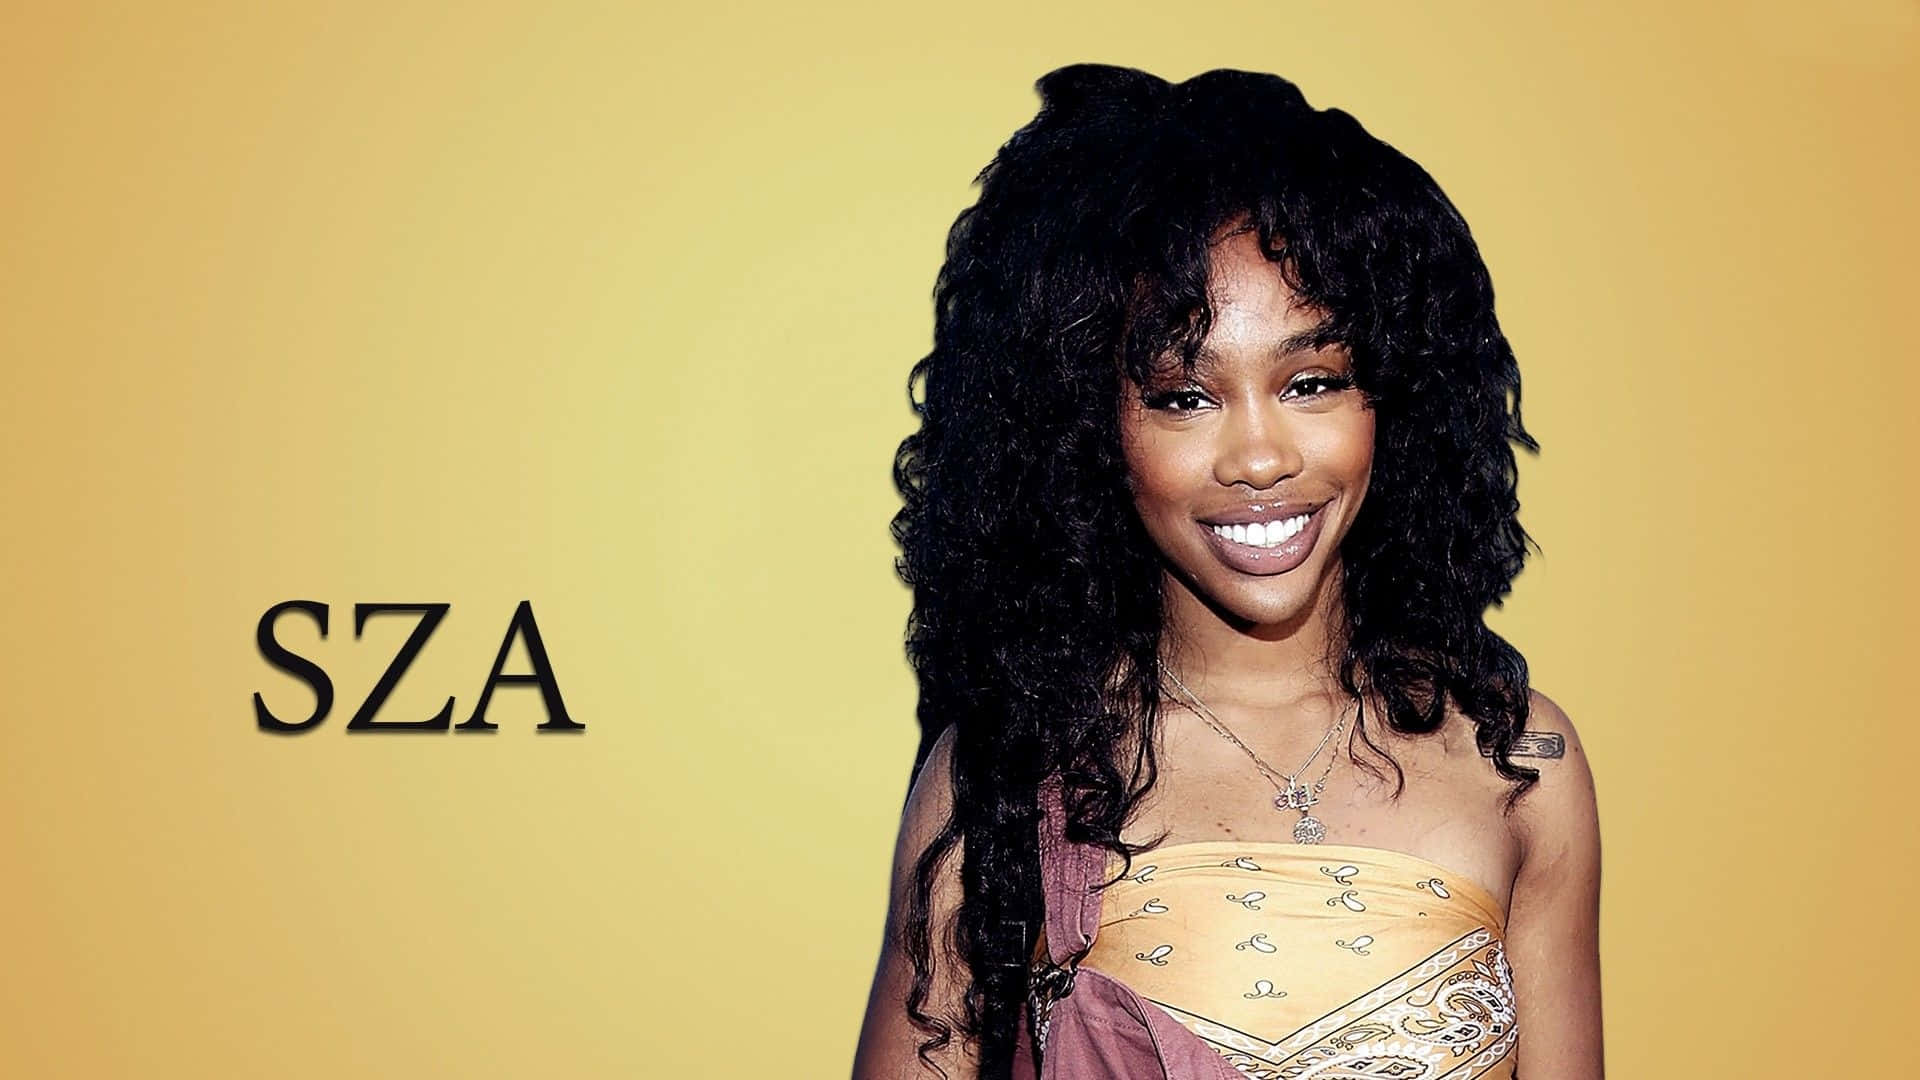 Sza celebrates her success with a World Tour Wallpaper